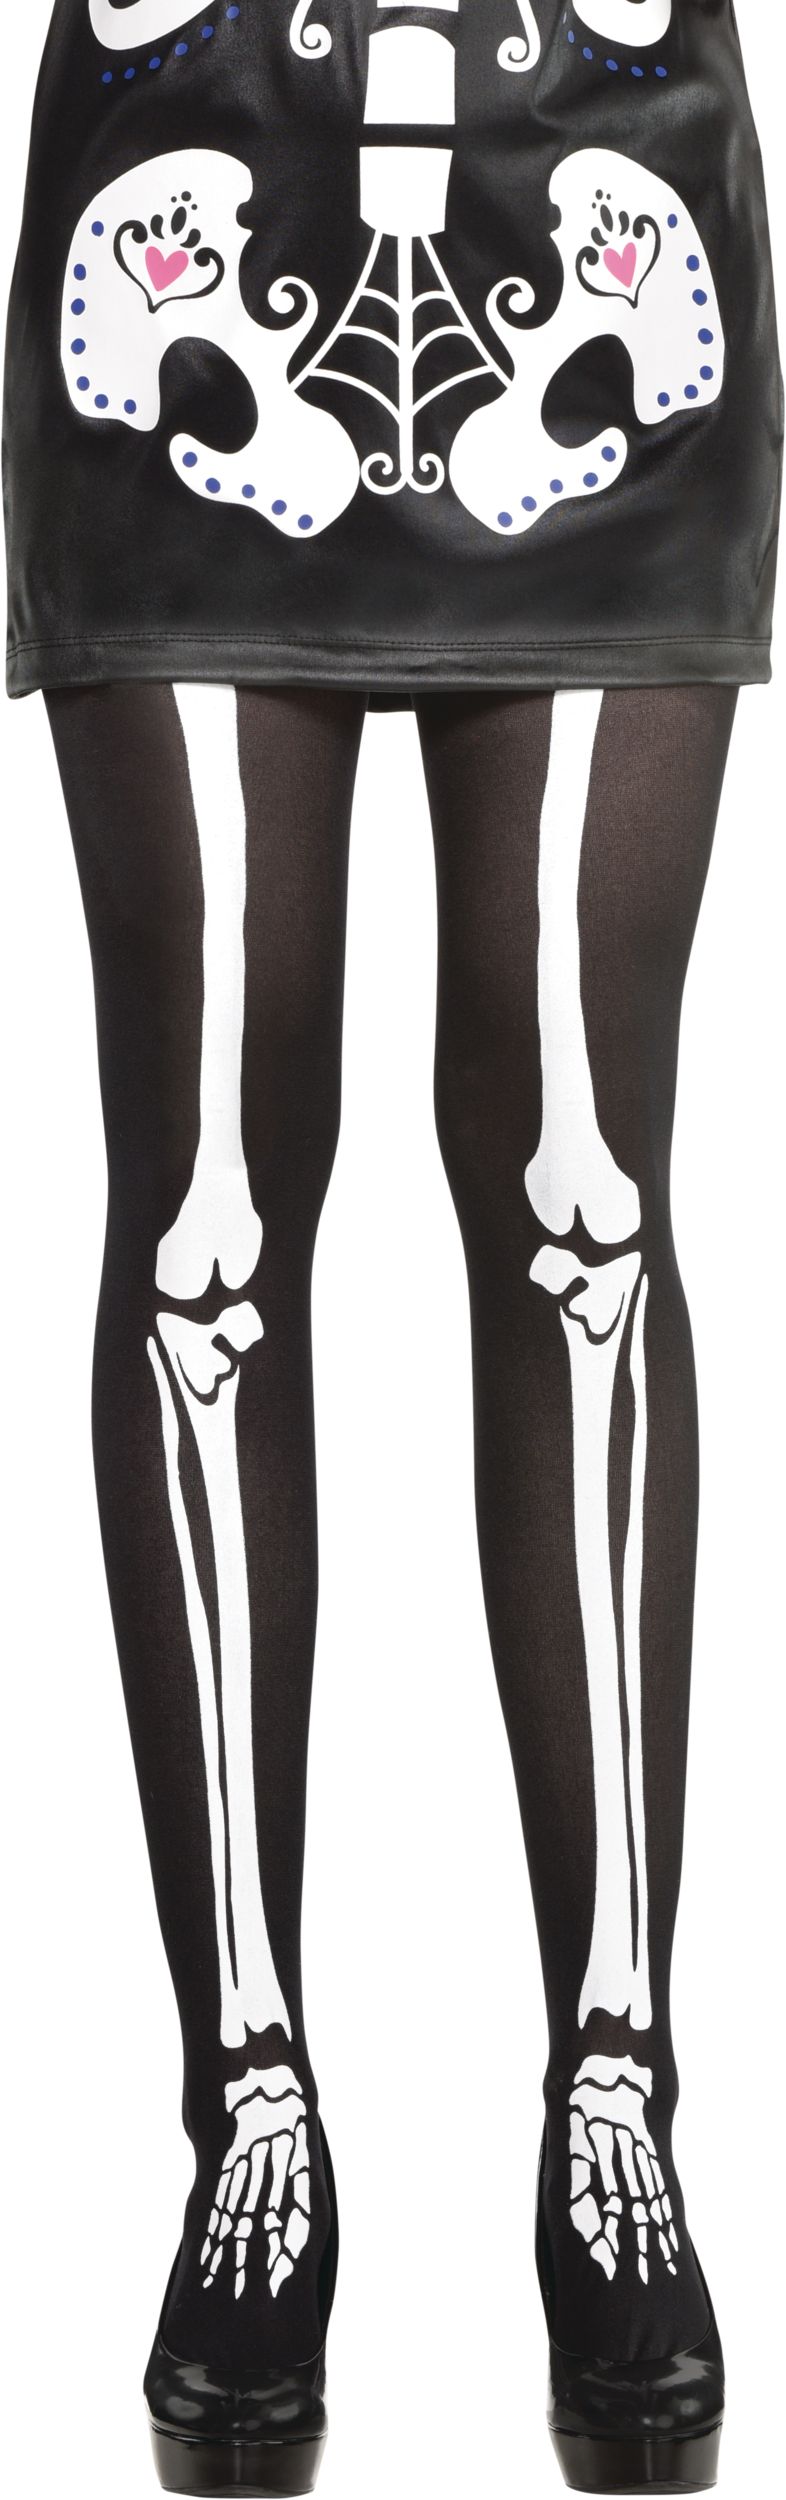 Adult Skeleton Bone Semi-Opaque Seamless Tights, Black/White, M/L, Wearable  Costume Accessory for Halloween